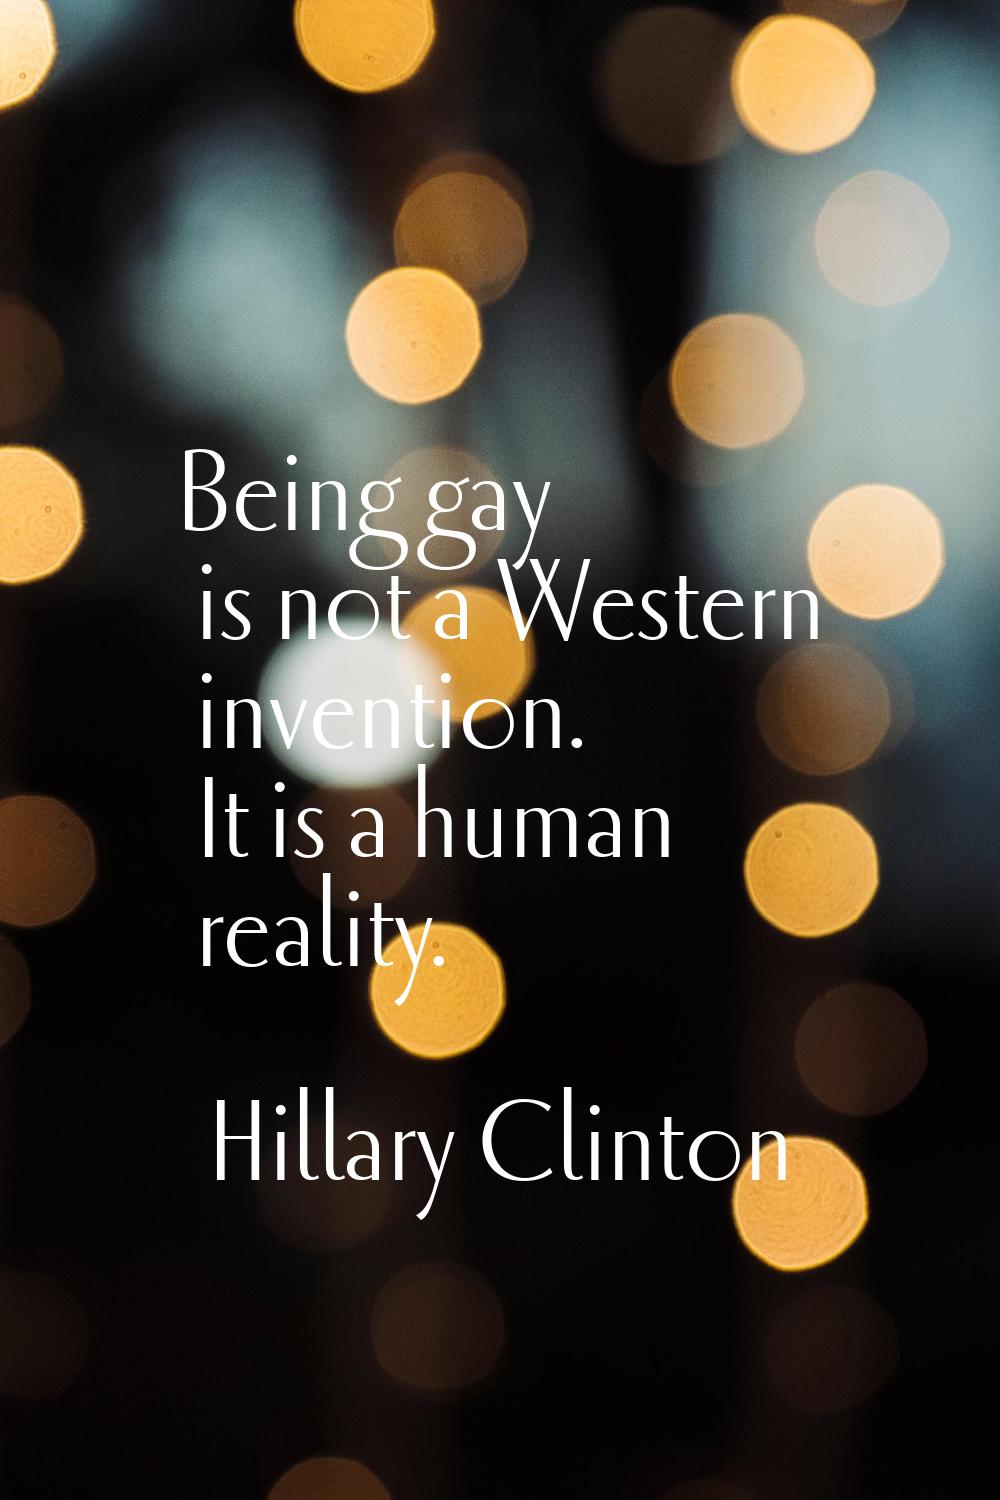 Being gay is not a Western invention. It is a human reality.